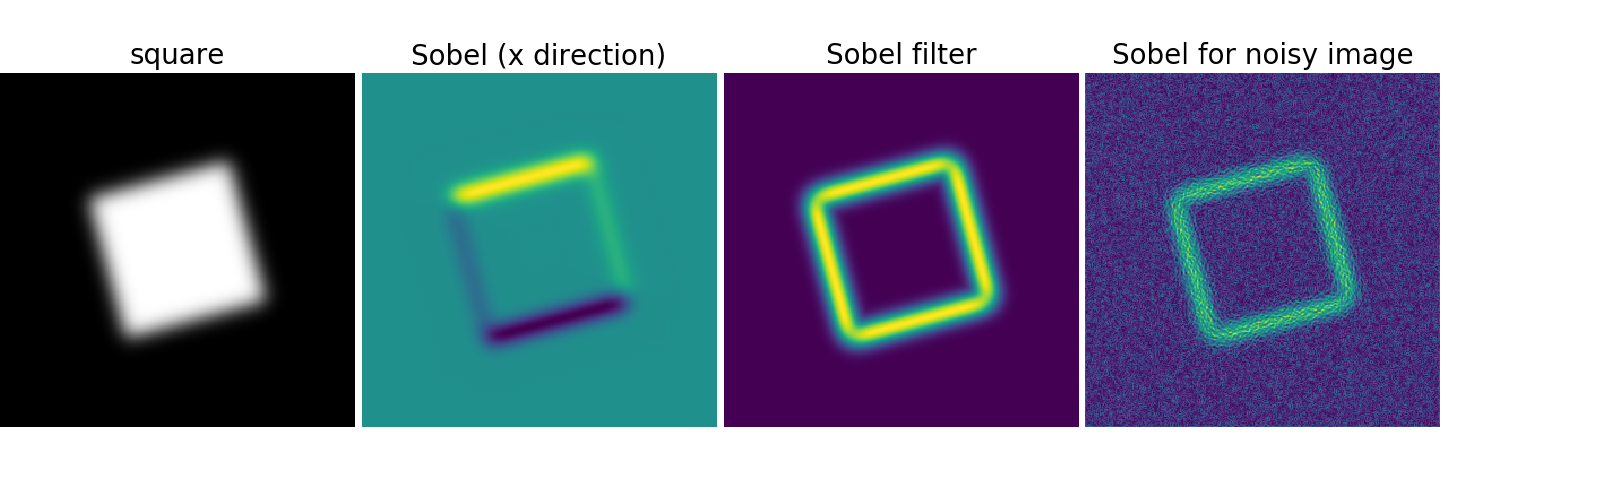 Kreunt nationale vlag Facet 2.6.8.17. Finding edges with Sobel filters — Scipy lecture notes